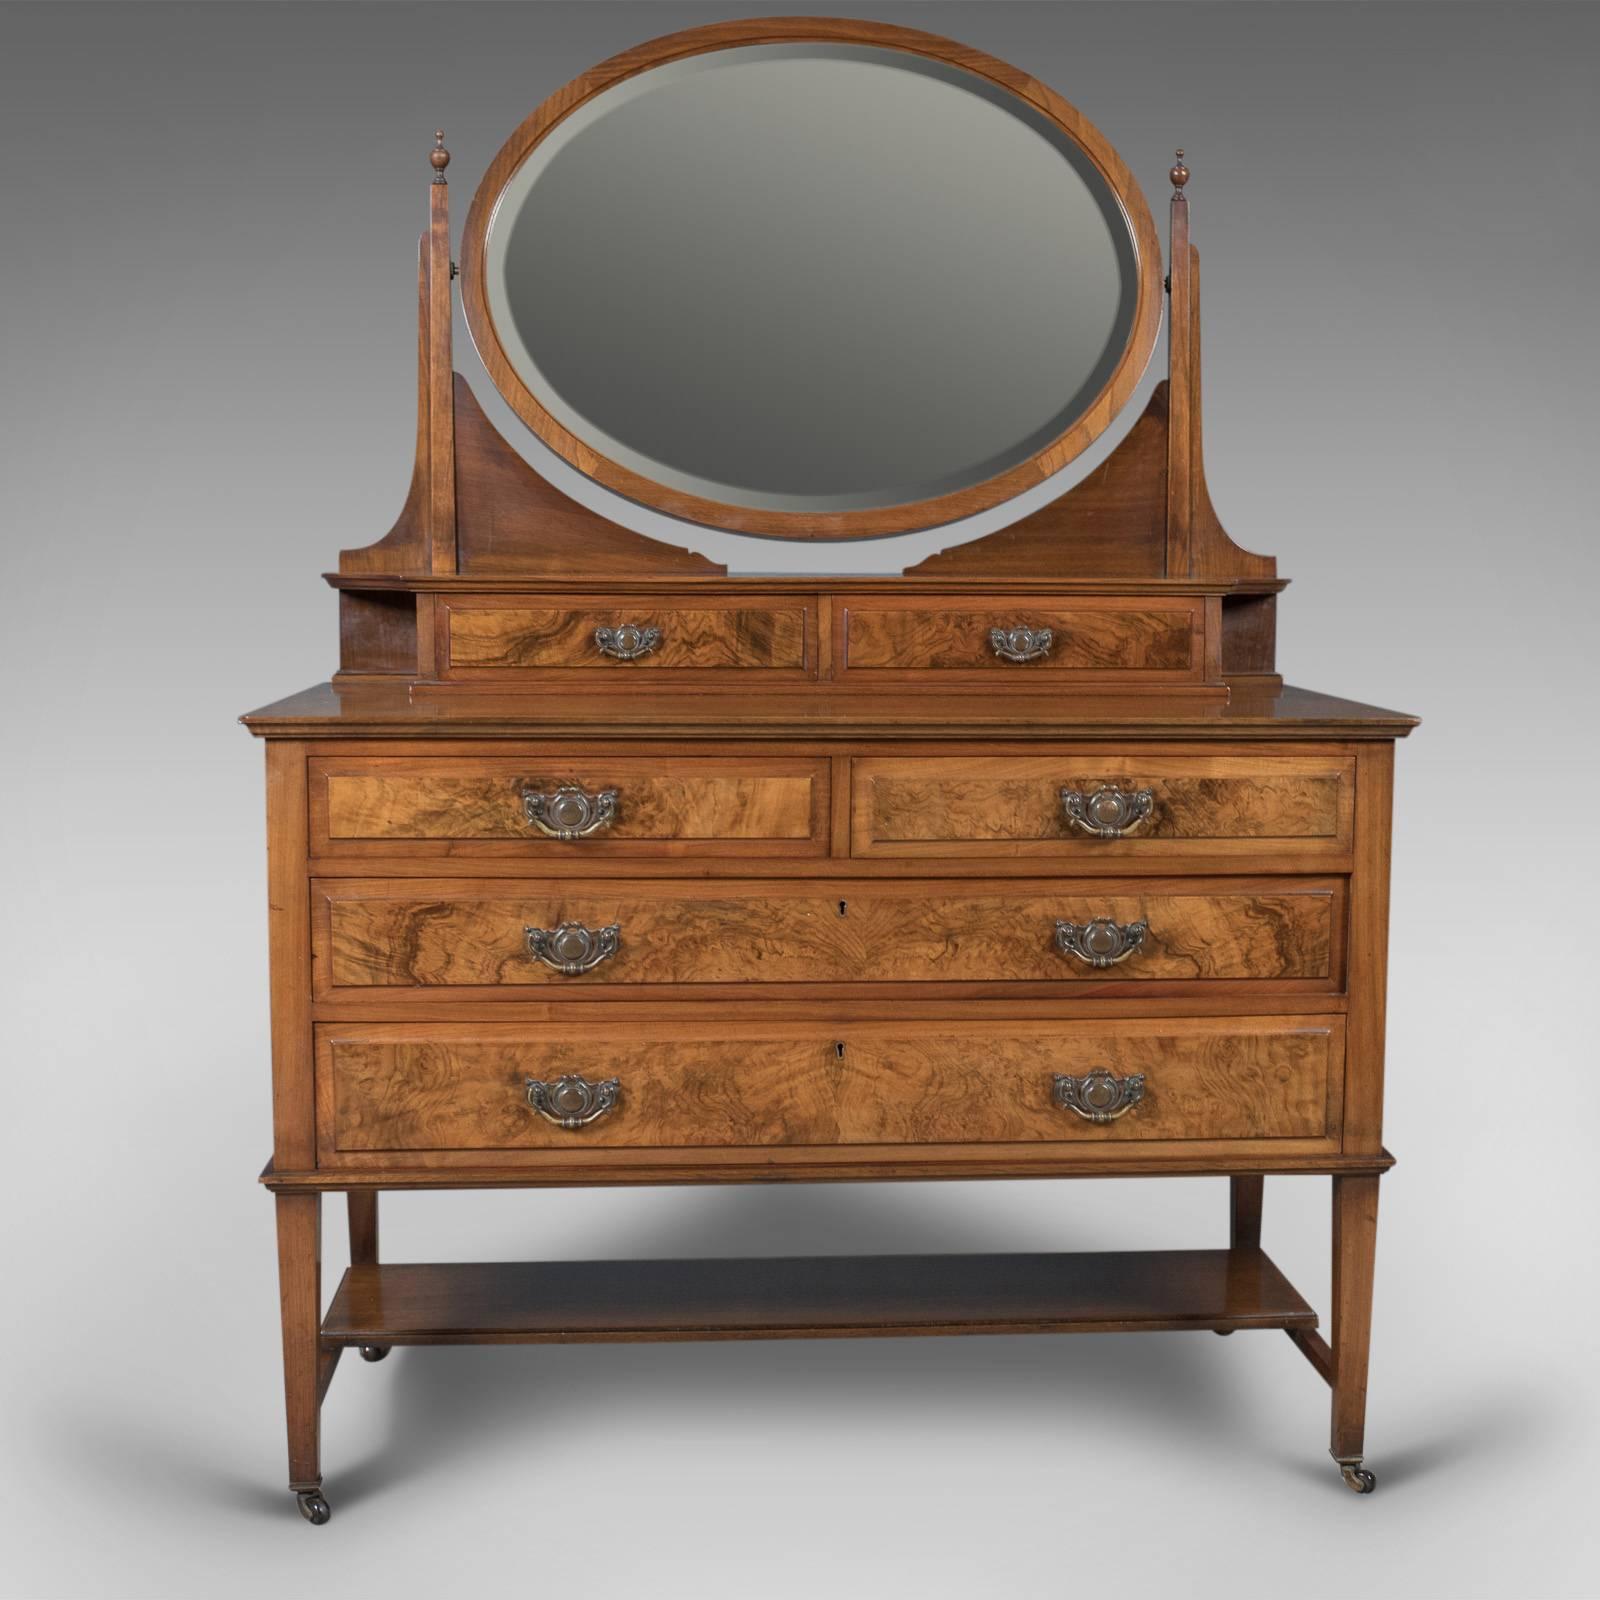 This is a stunning antique dressing table, an Edwardian vanity chest of drawers with an ovular swing mirror, English, circa 1910. Originally made and retailed by Rose & Co. of Stockton-on-Tees.

First class condition in English walnut with a